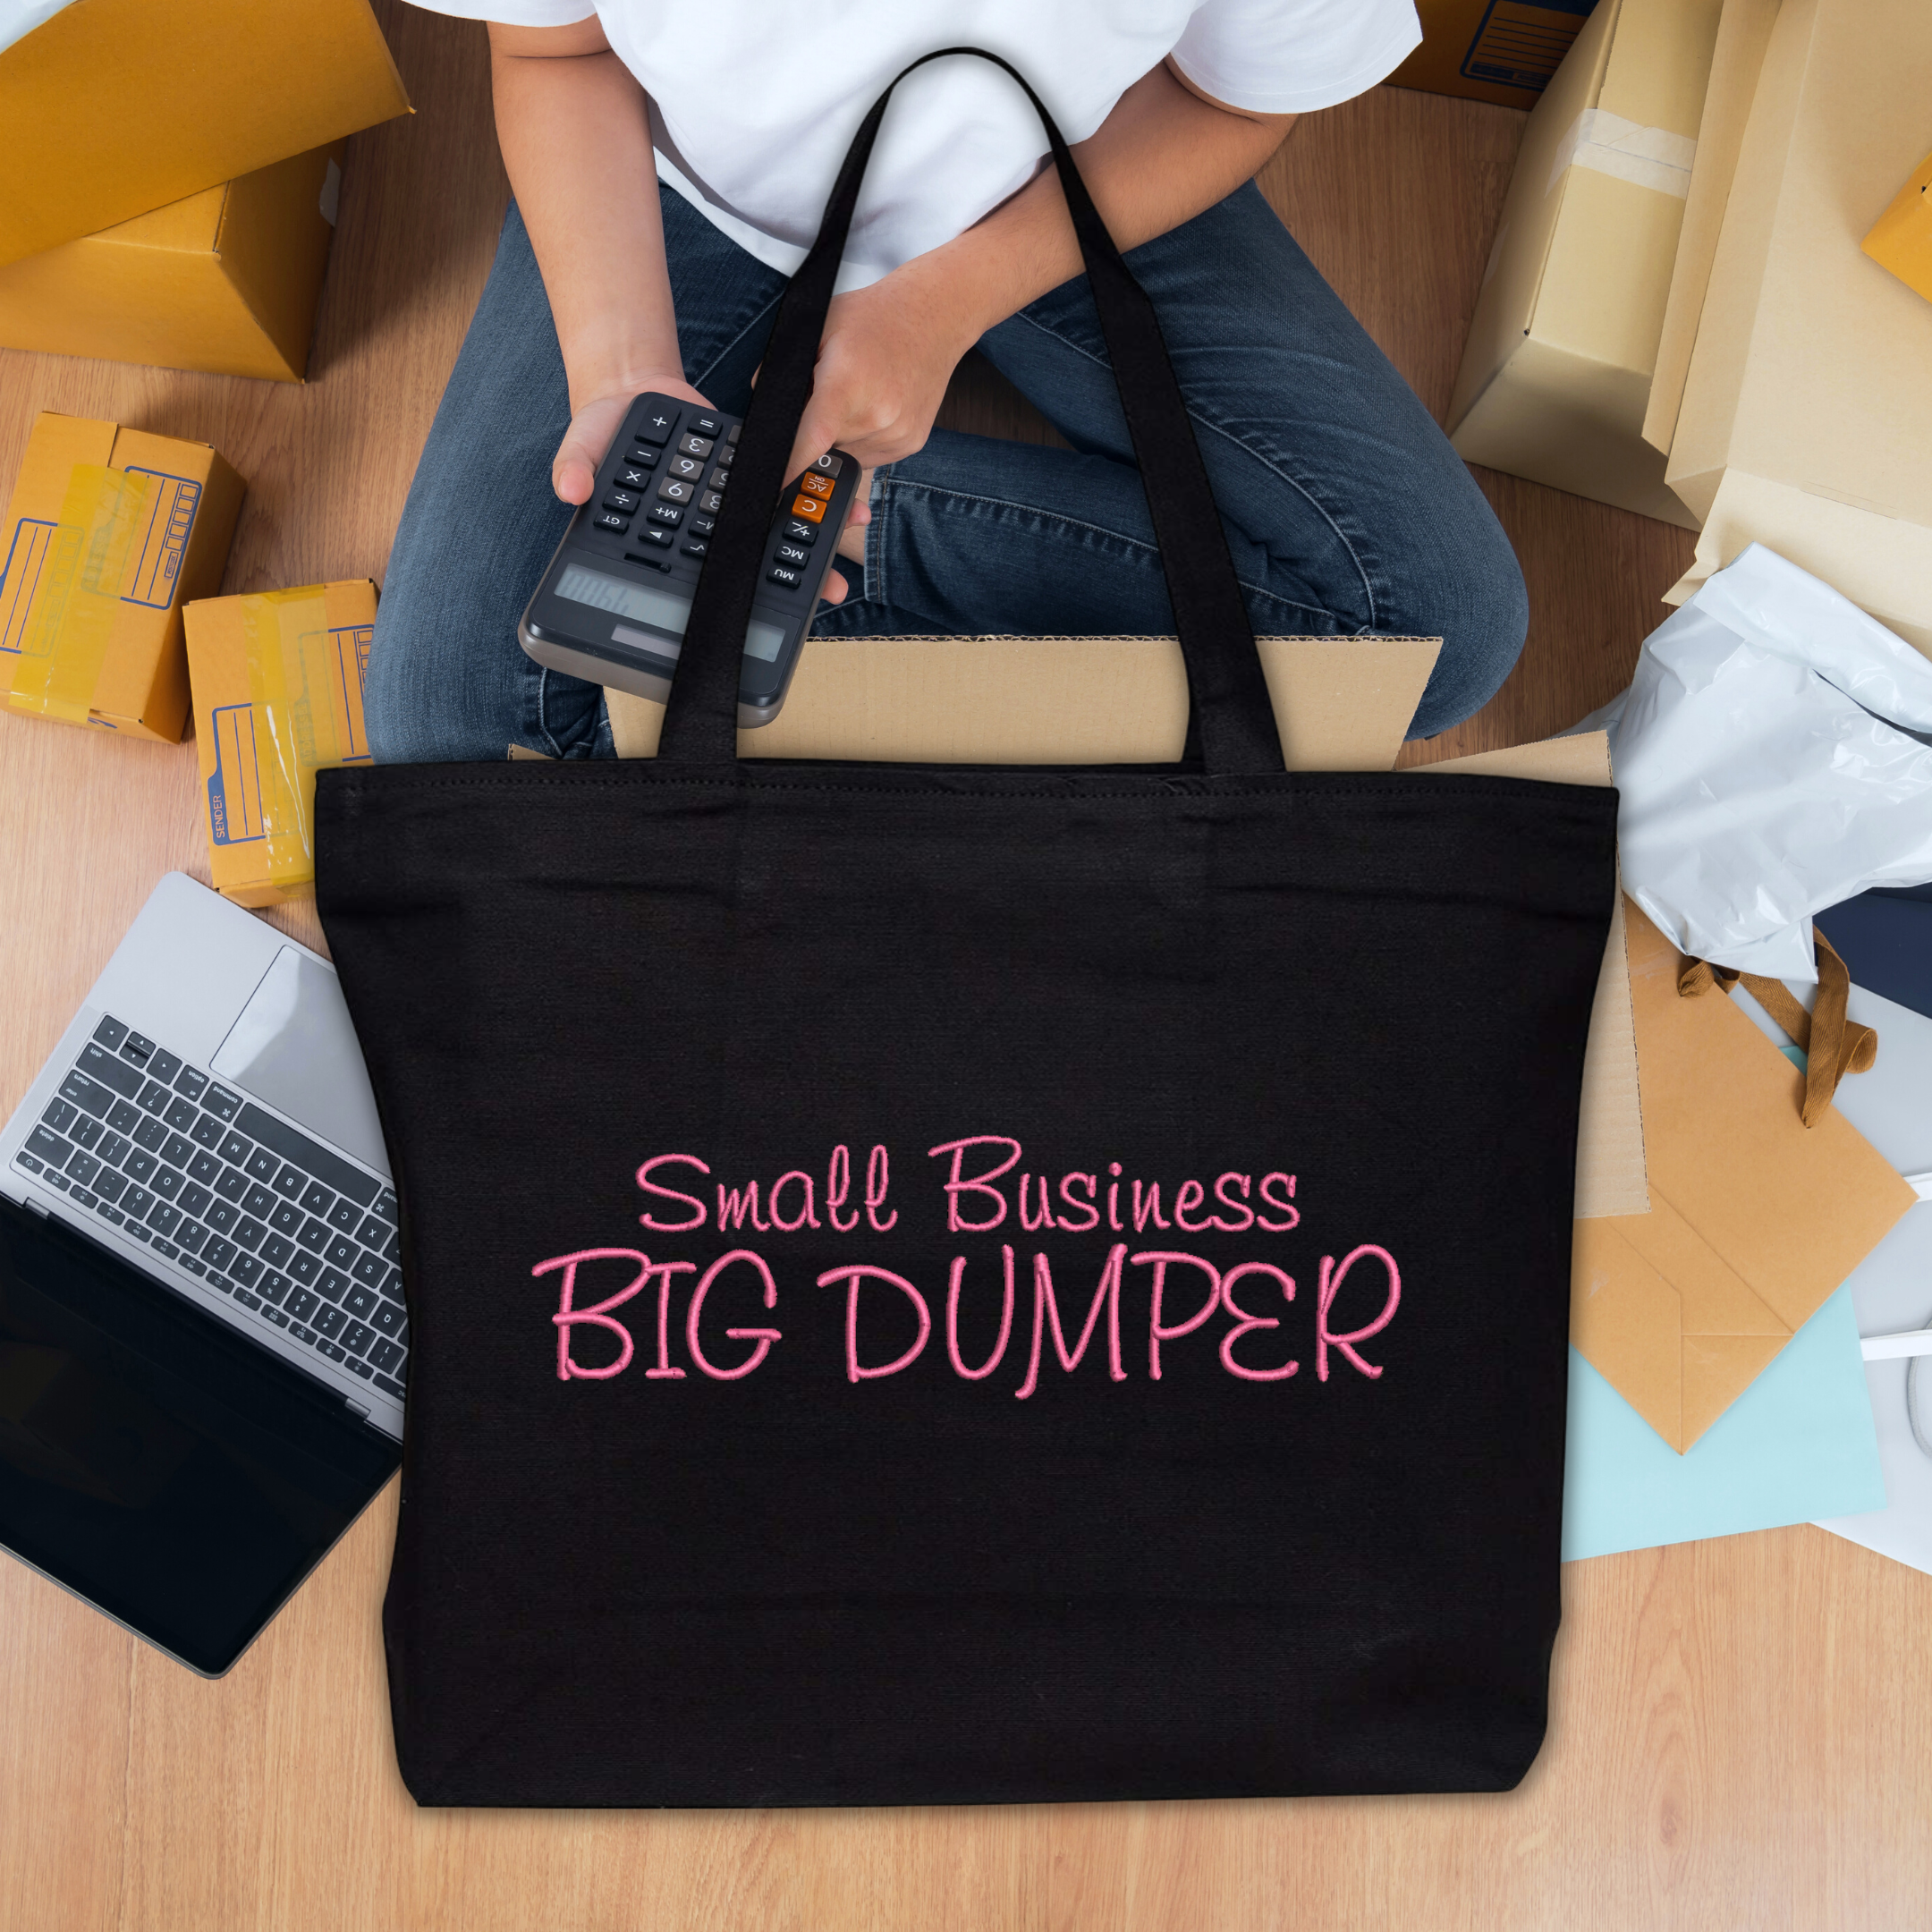 Small Business BIG DUMPER Embroidered Canvas Tote Bag